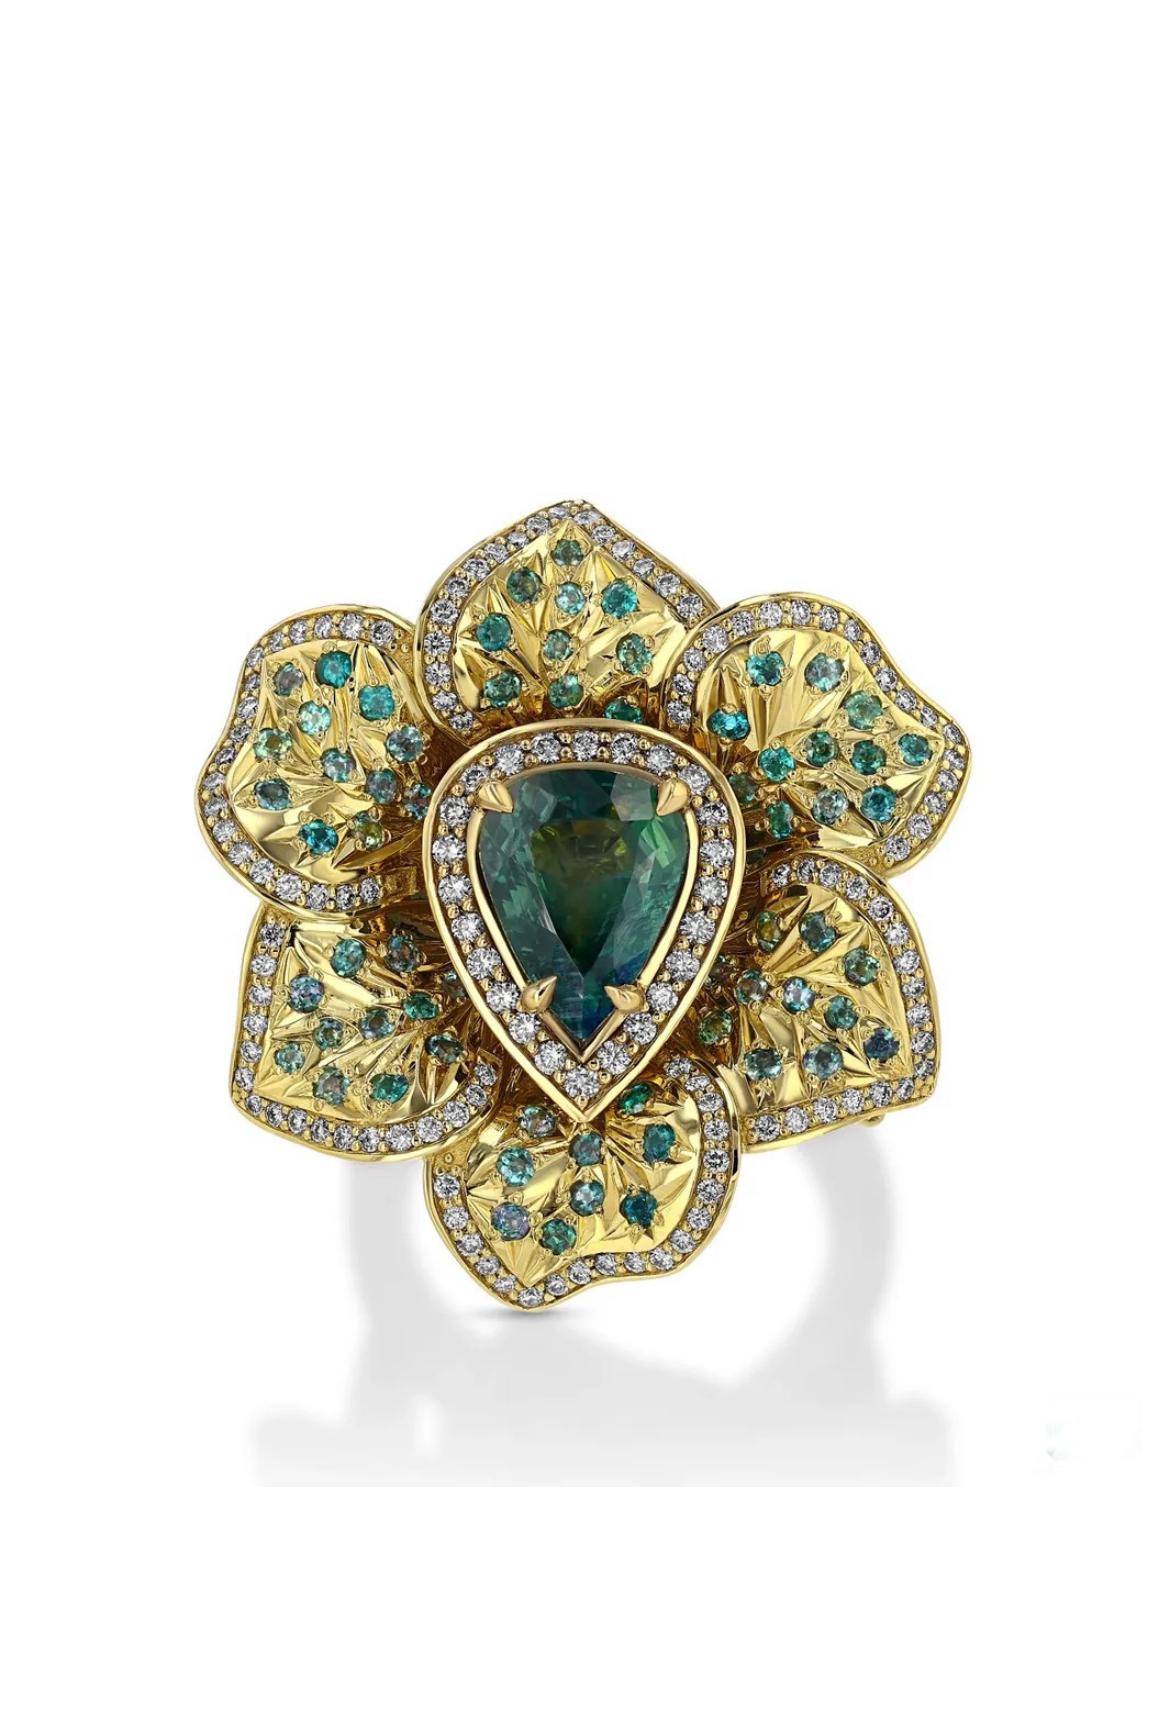 18K yellow gold ring, featuring an untreated 3.46-carat, pear-shaped Alexandrite from Orissa-India, accented with 76 round untreated Alexandrites from Brazil totaling 0.83 carats and 228 round brilliant-cut diamonds totaling 1.32 carats.

The color